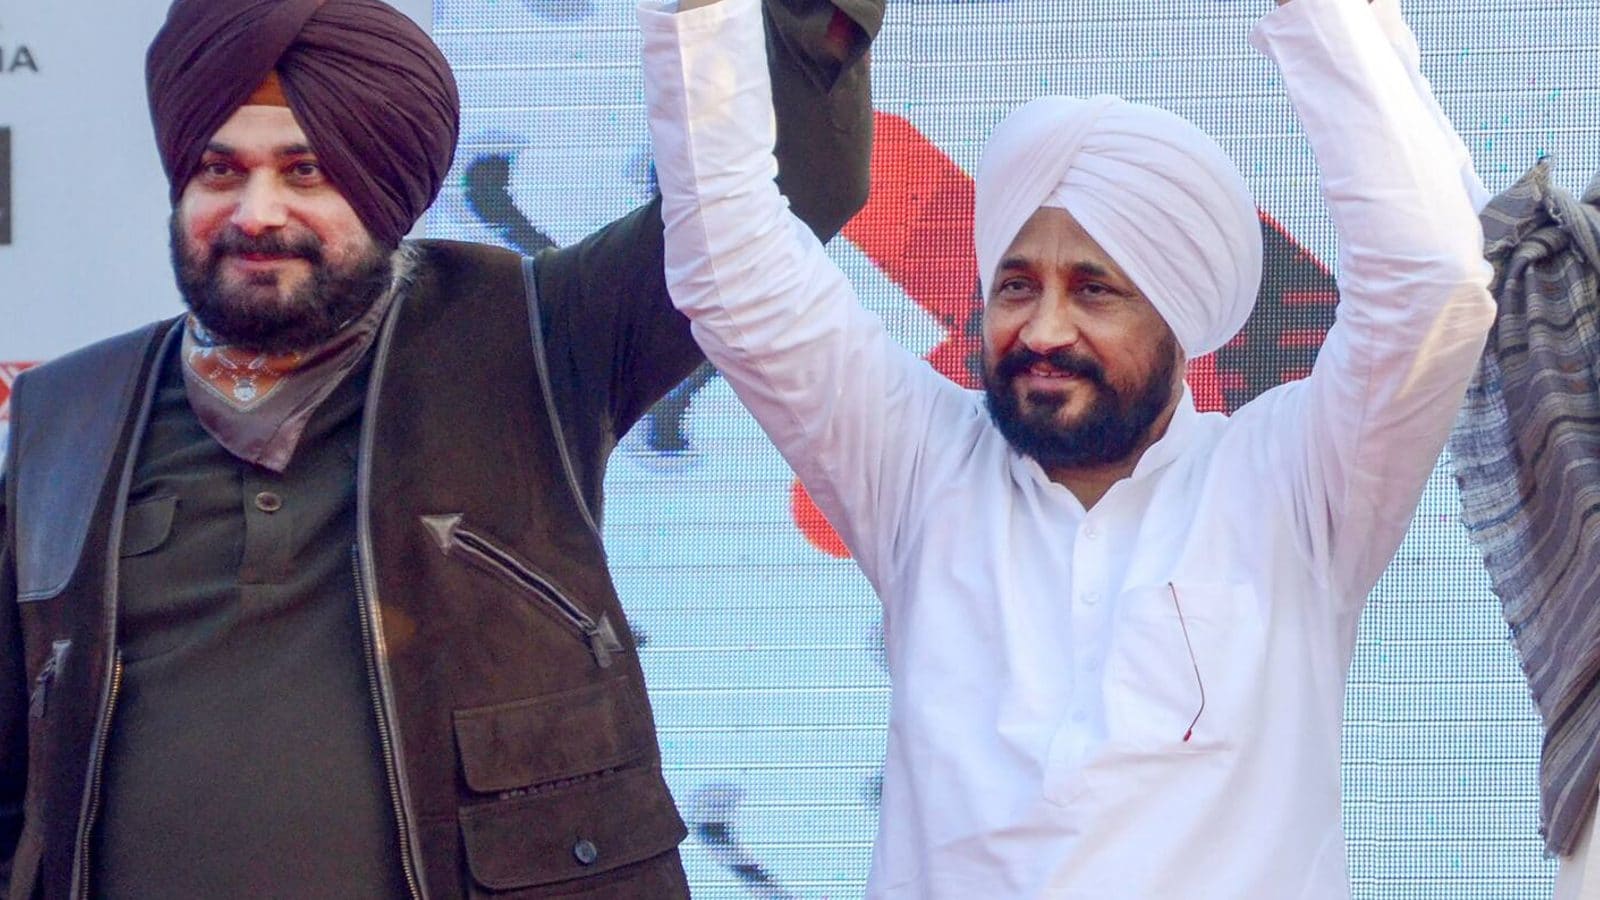 Punjab Polls: Cong First List Out; Channi to Contest from Chamkaur Sahib, Sidhu from Amritsar East